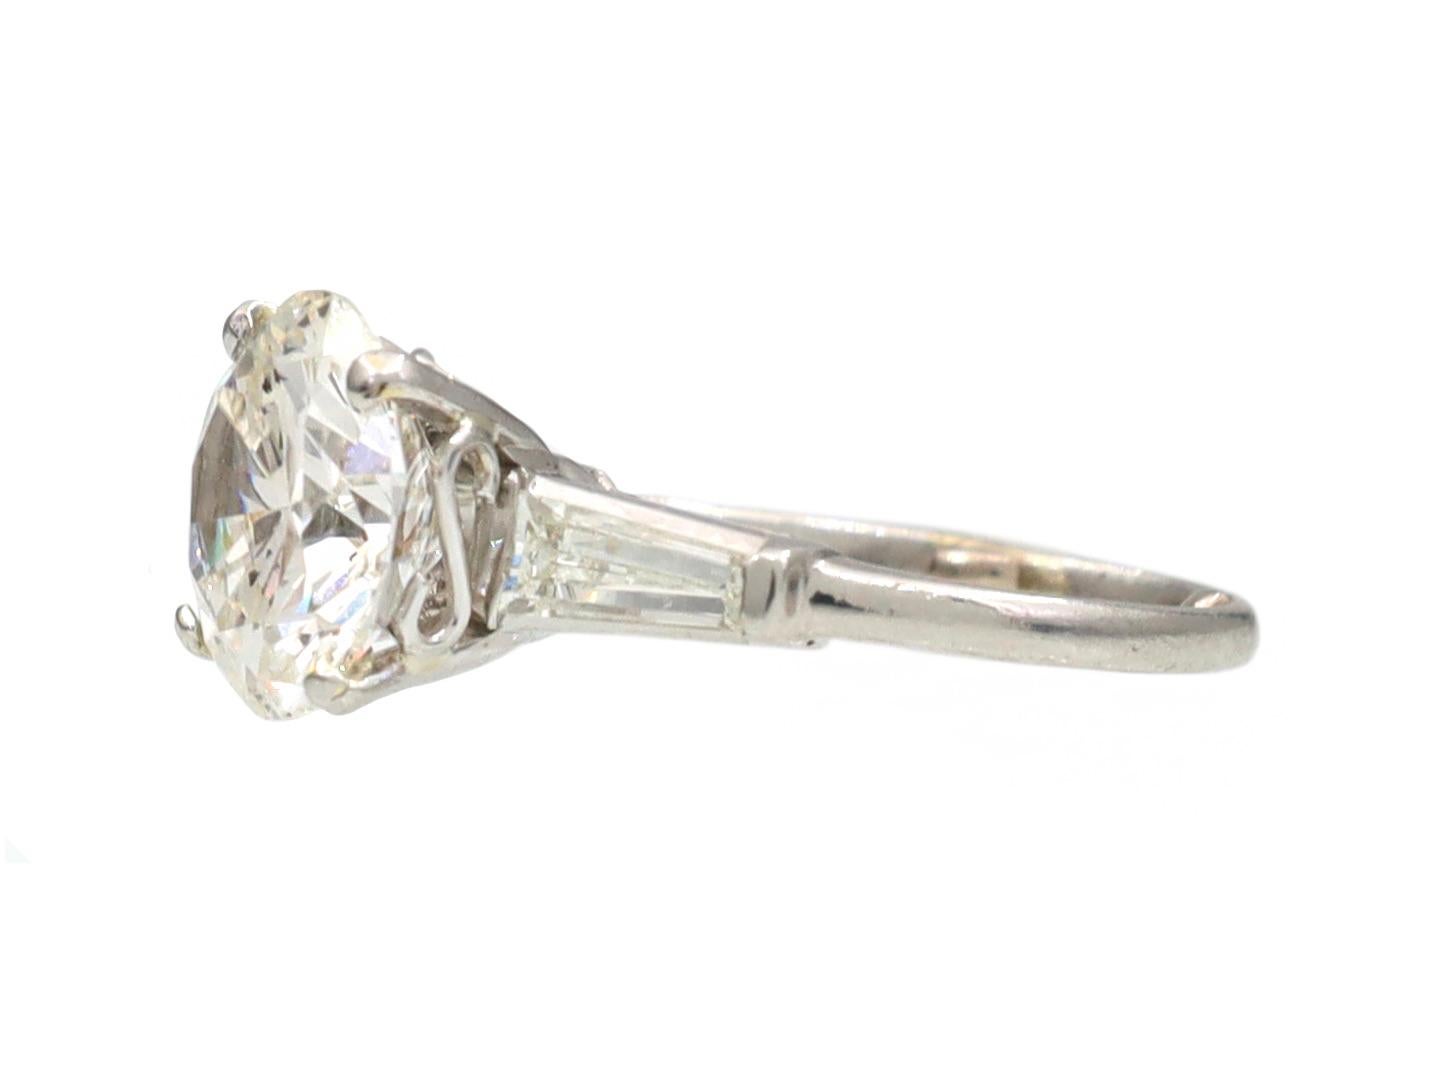 Vintage 3.00ct diamond flanked solitaire engagement ring in platinum. Centred with an estimated 3.00ct round brilliant cut diamond, G colour, SI1 clarity in a four claw setting, flanked to either side with two tapering baguette cut diamonds in